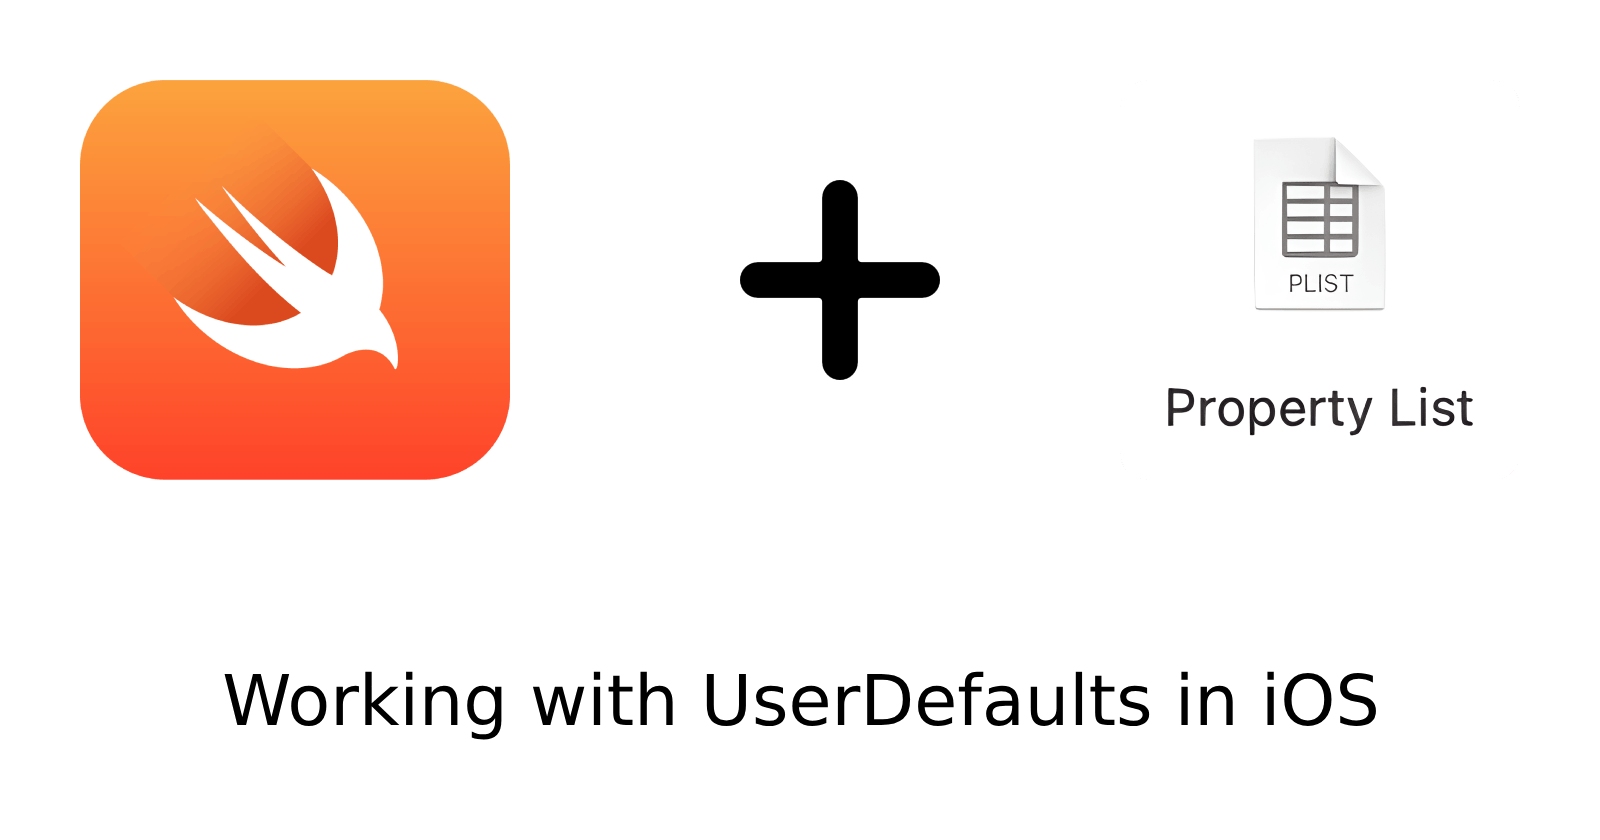 Working with UserDefaults in iOS